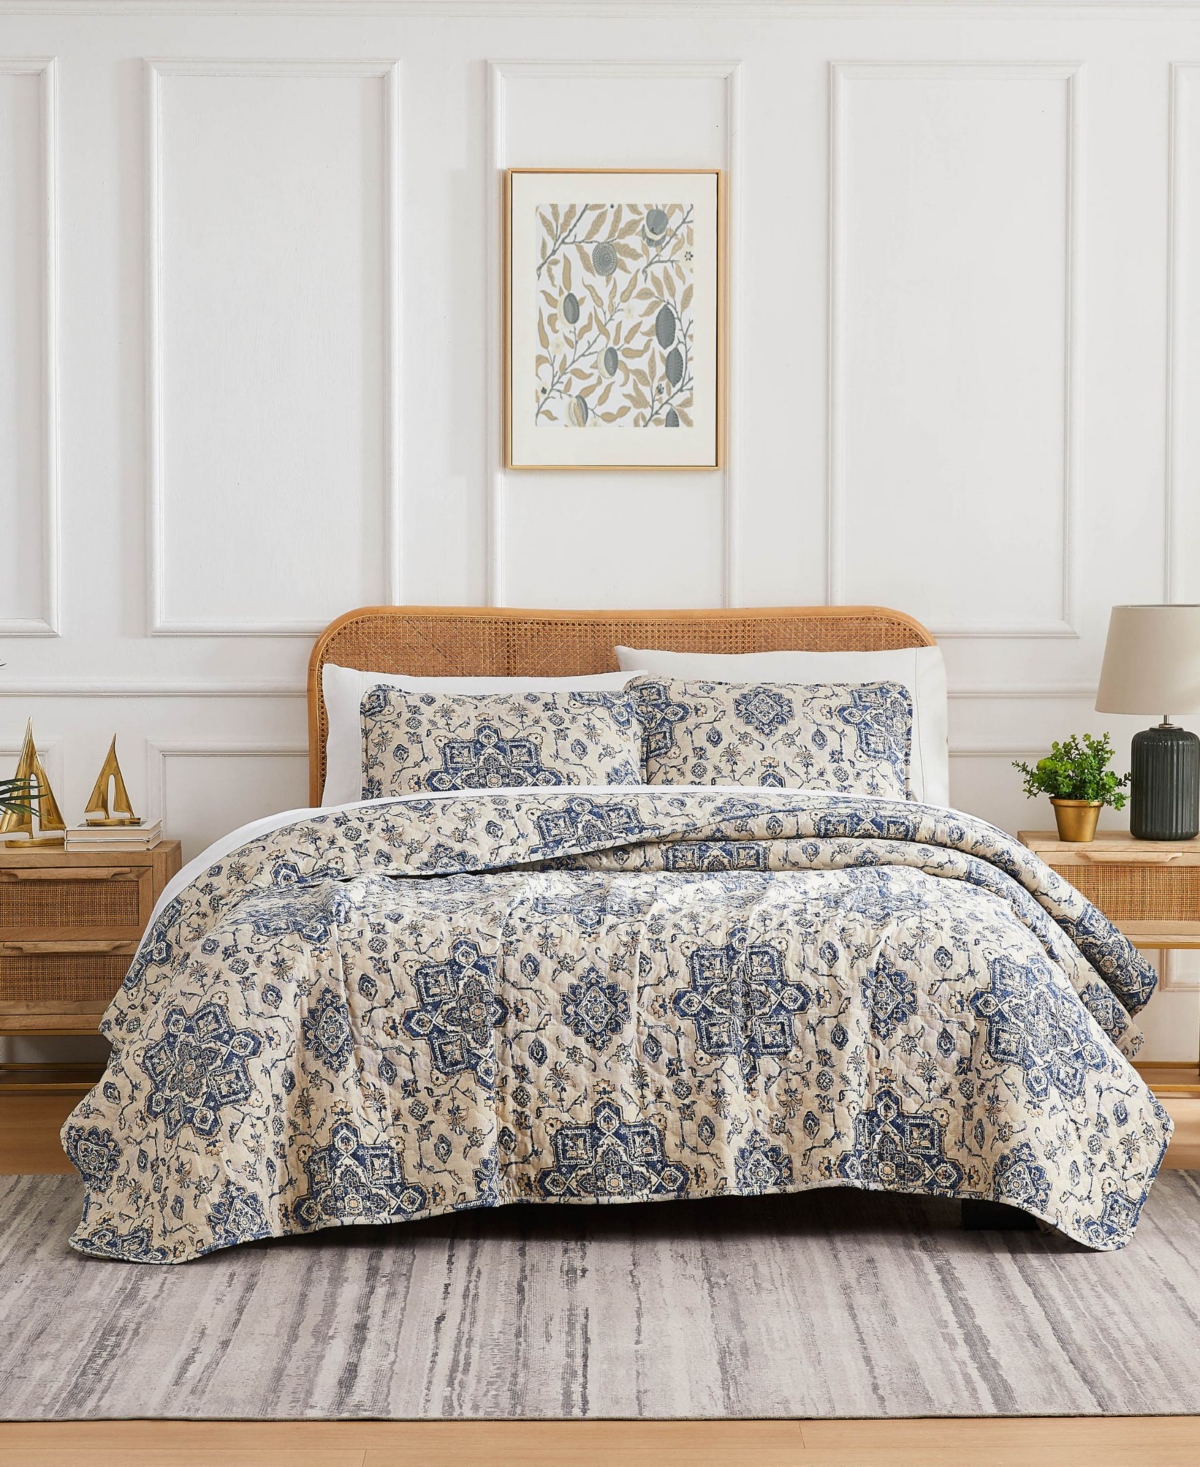 Southshore Fine Linens Persia Oversized 2 Piece Quilt Set, Twin/twin Xl In Indigo